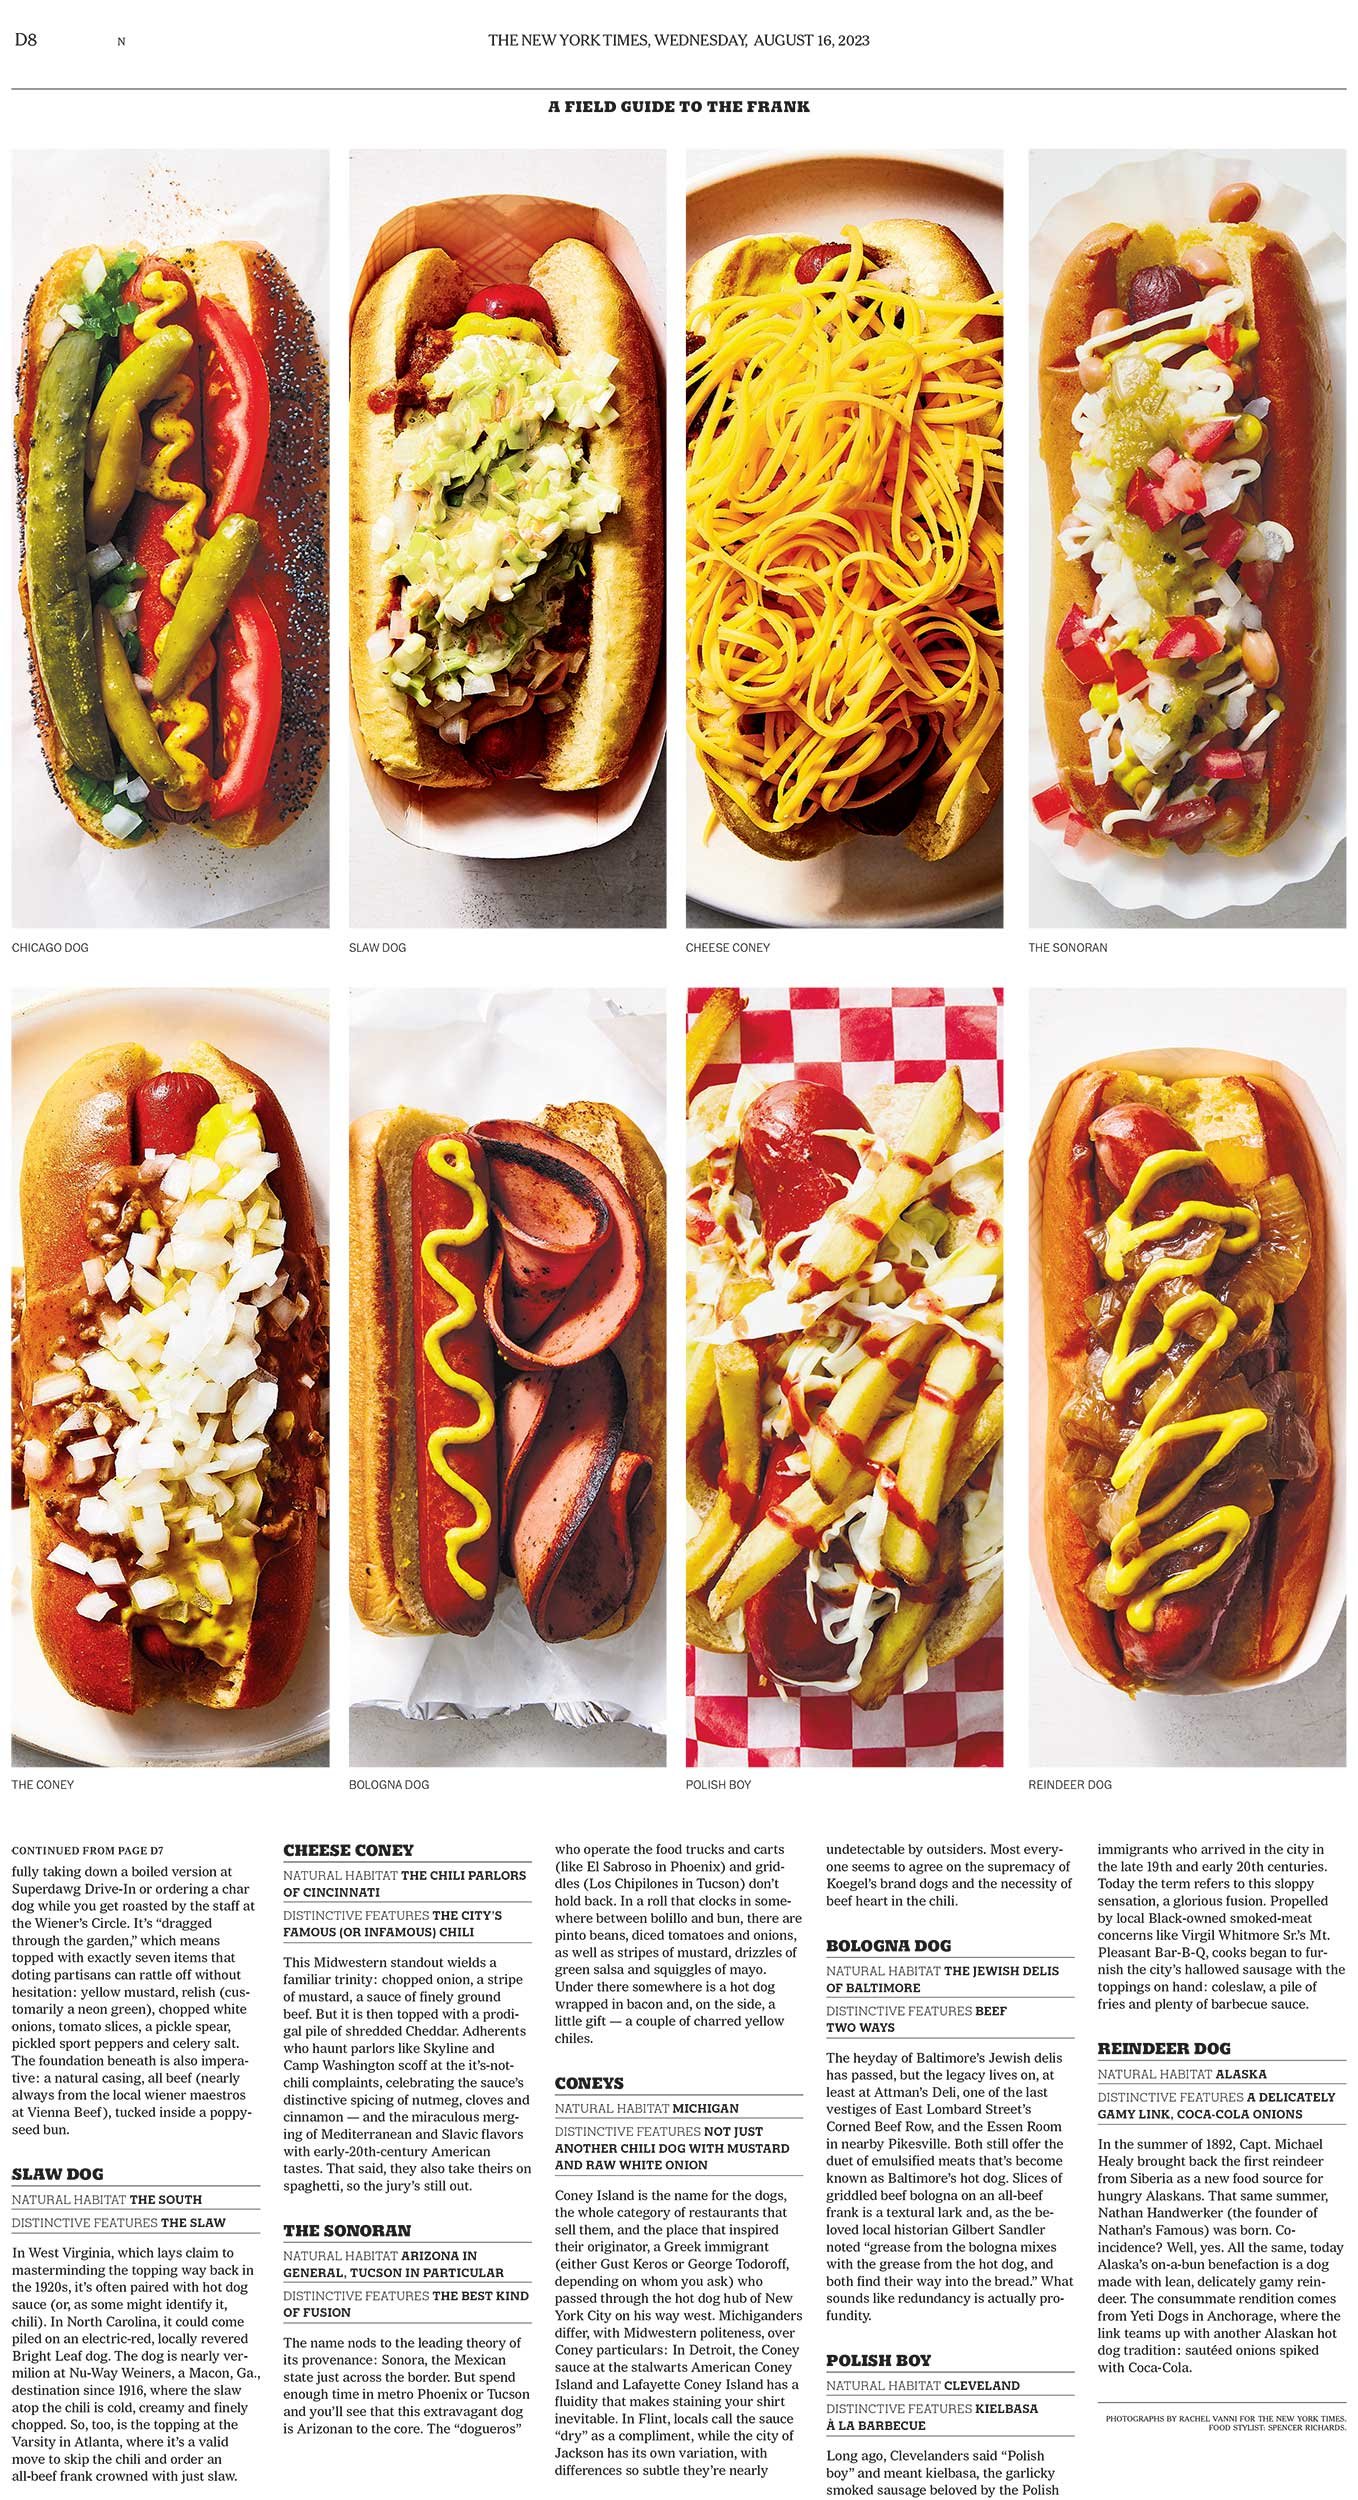 nyc-nj-food-editorial-photographer-nytimes-cooking-hot-dogs2.jpg